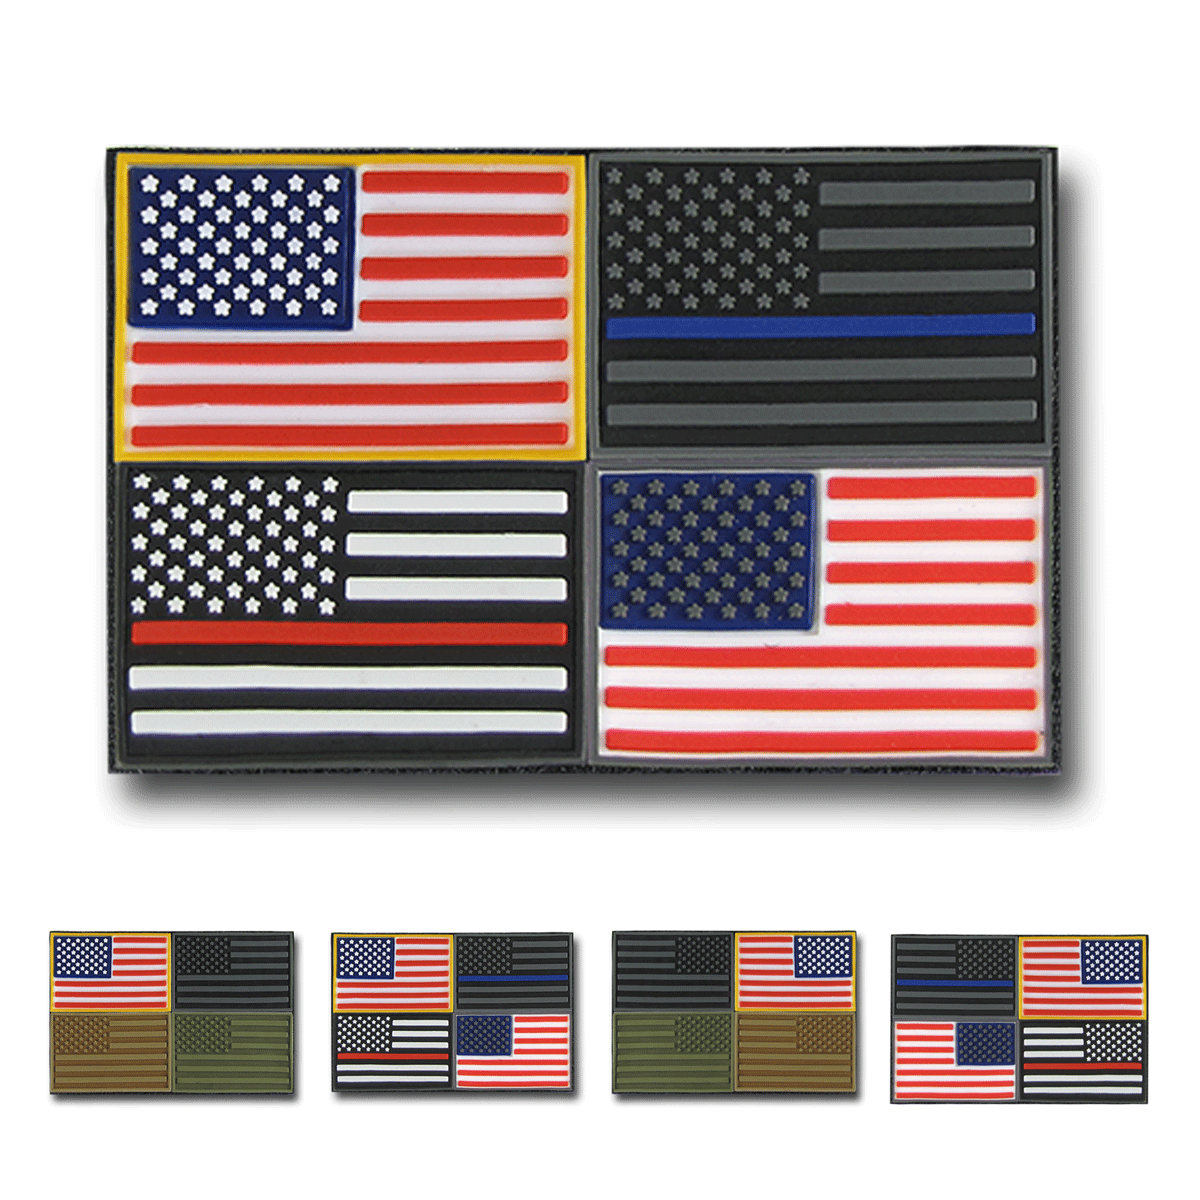 USA American Flag Patch 3”X 2” Tactical VELCRO Military Patch-Left Side